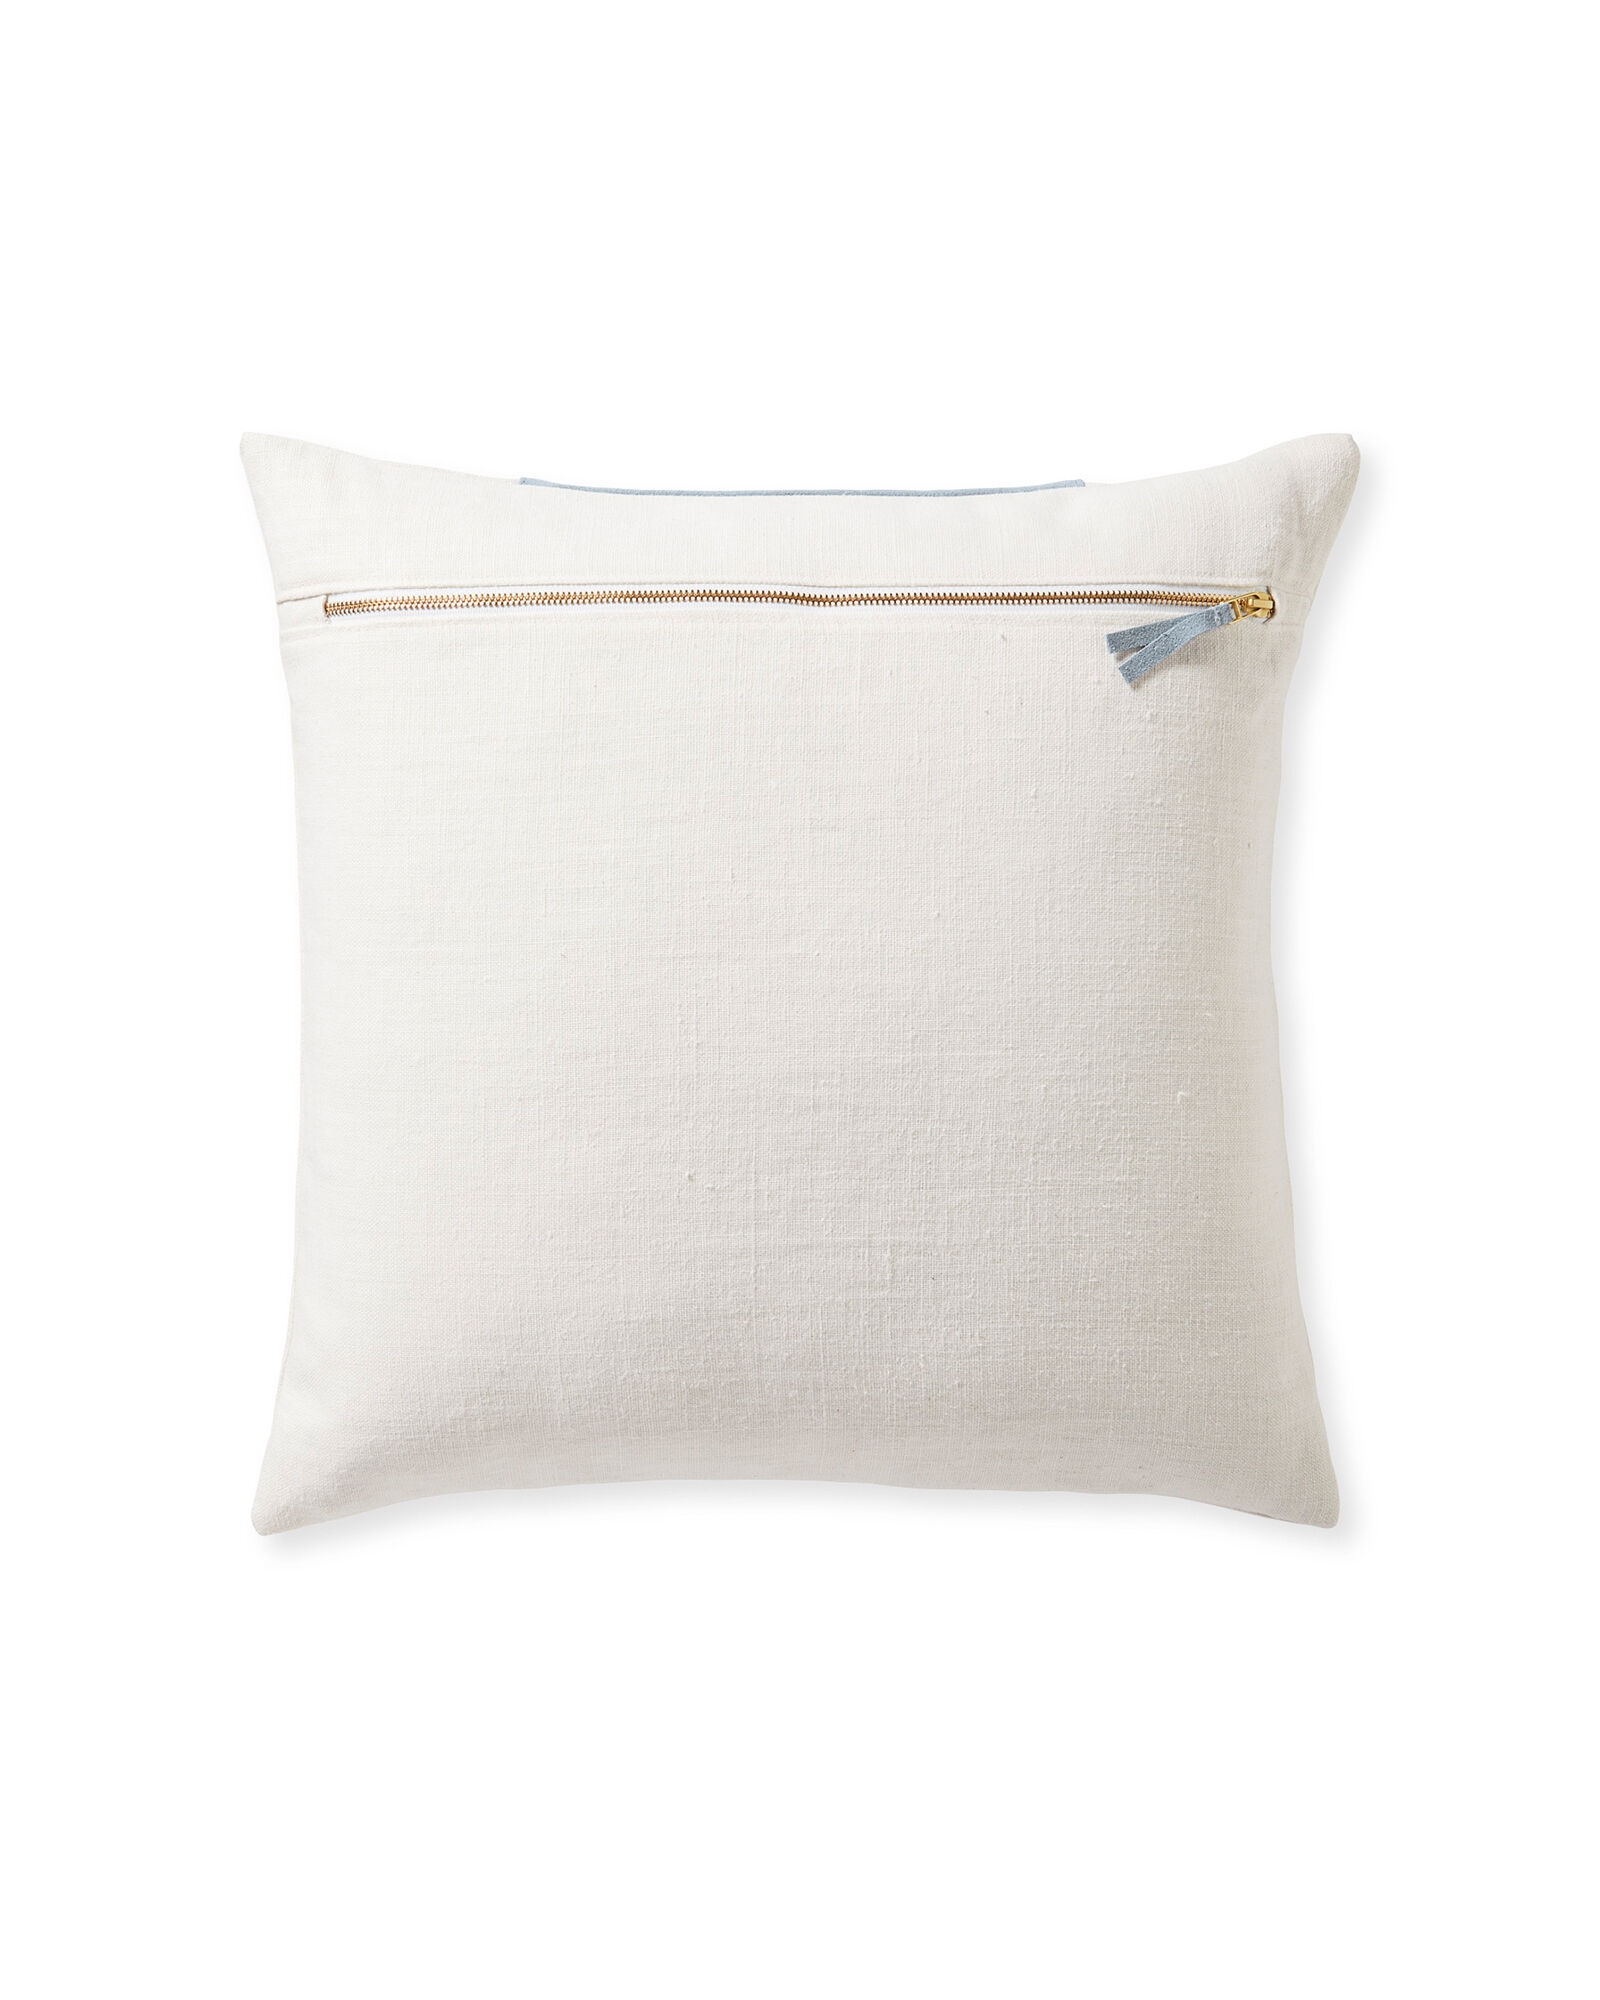 North Lake Pillow Cover - Image 2